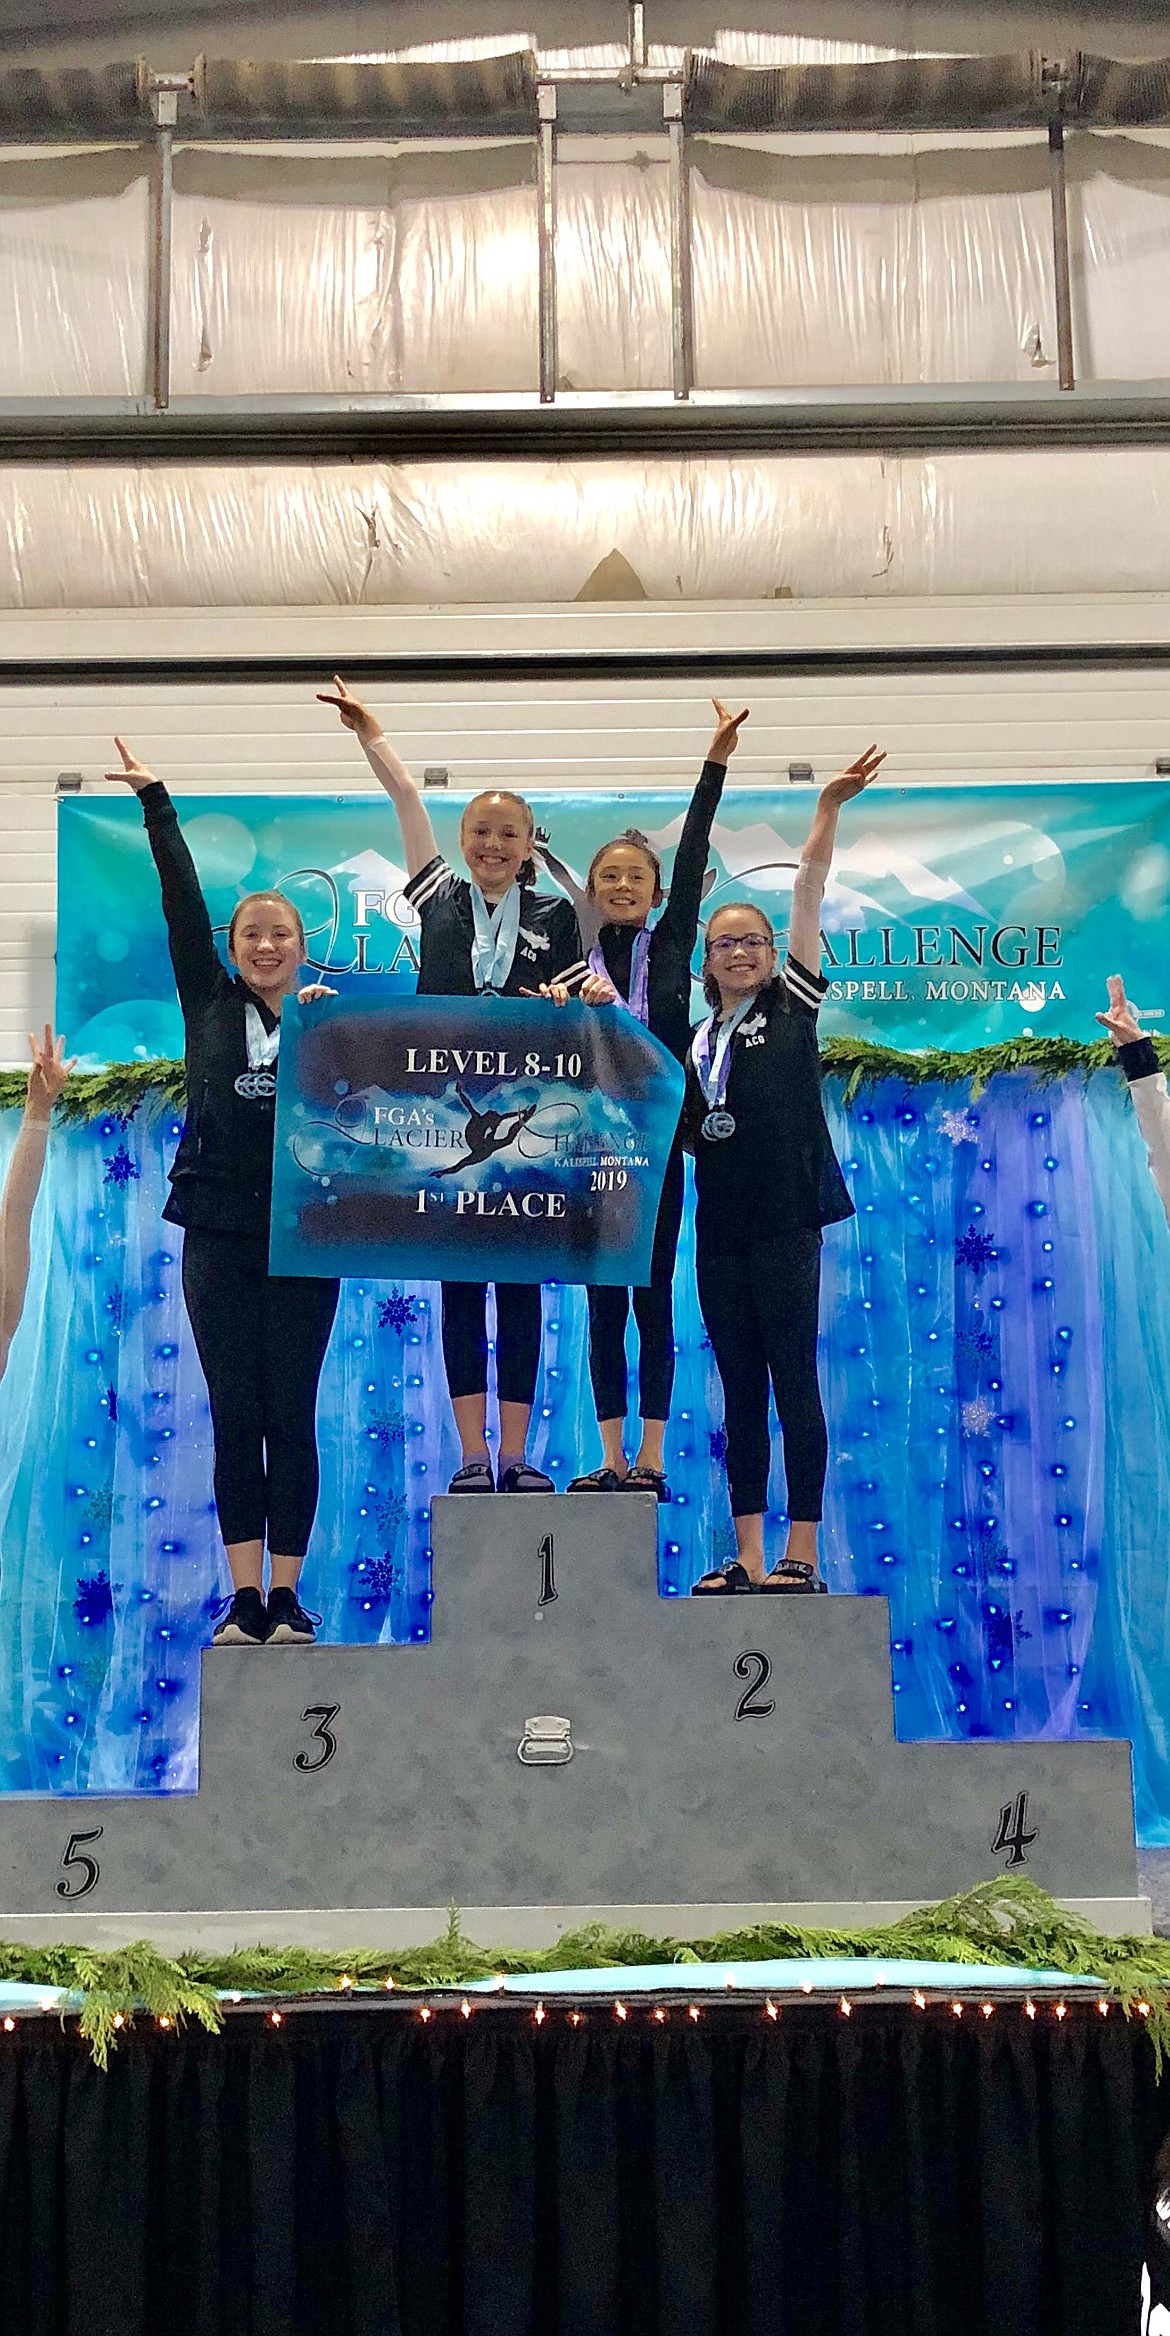 Courtesy photo
Avant Coeur Level 8s and 9s took 1st Place as a team at the Glacier Challenge in Kalispell, Mont., last weekend. From left are Sam Snow, Madalyn McCormick, Maiya Terry and Danica McCormick.